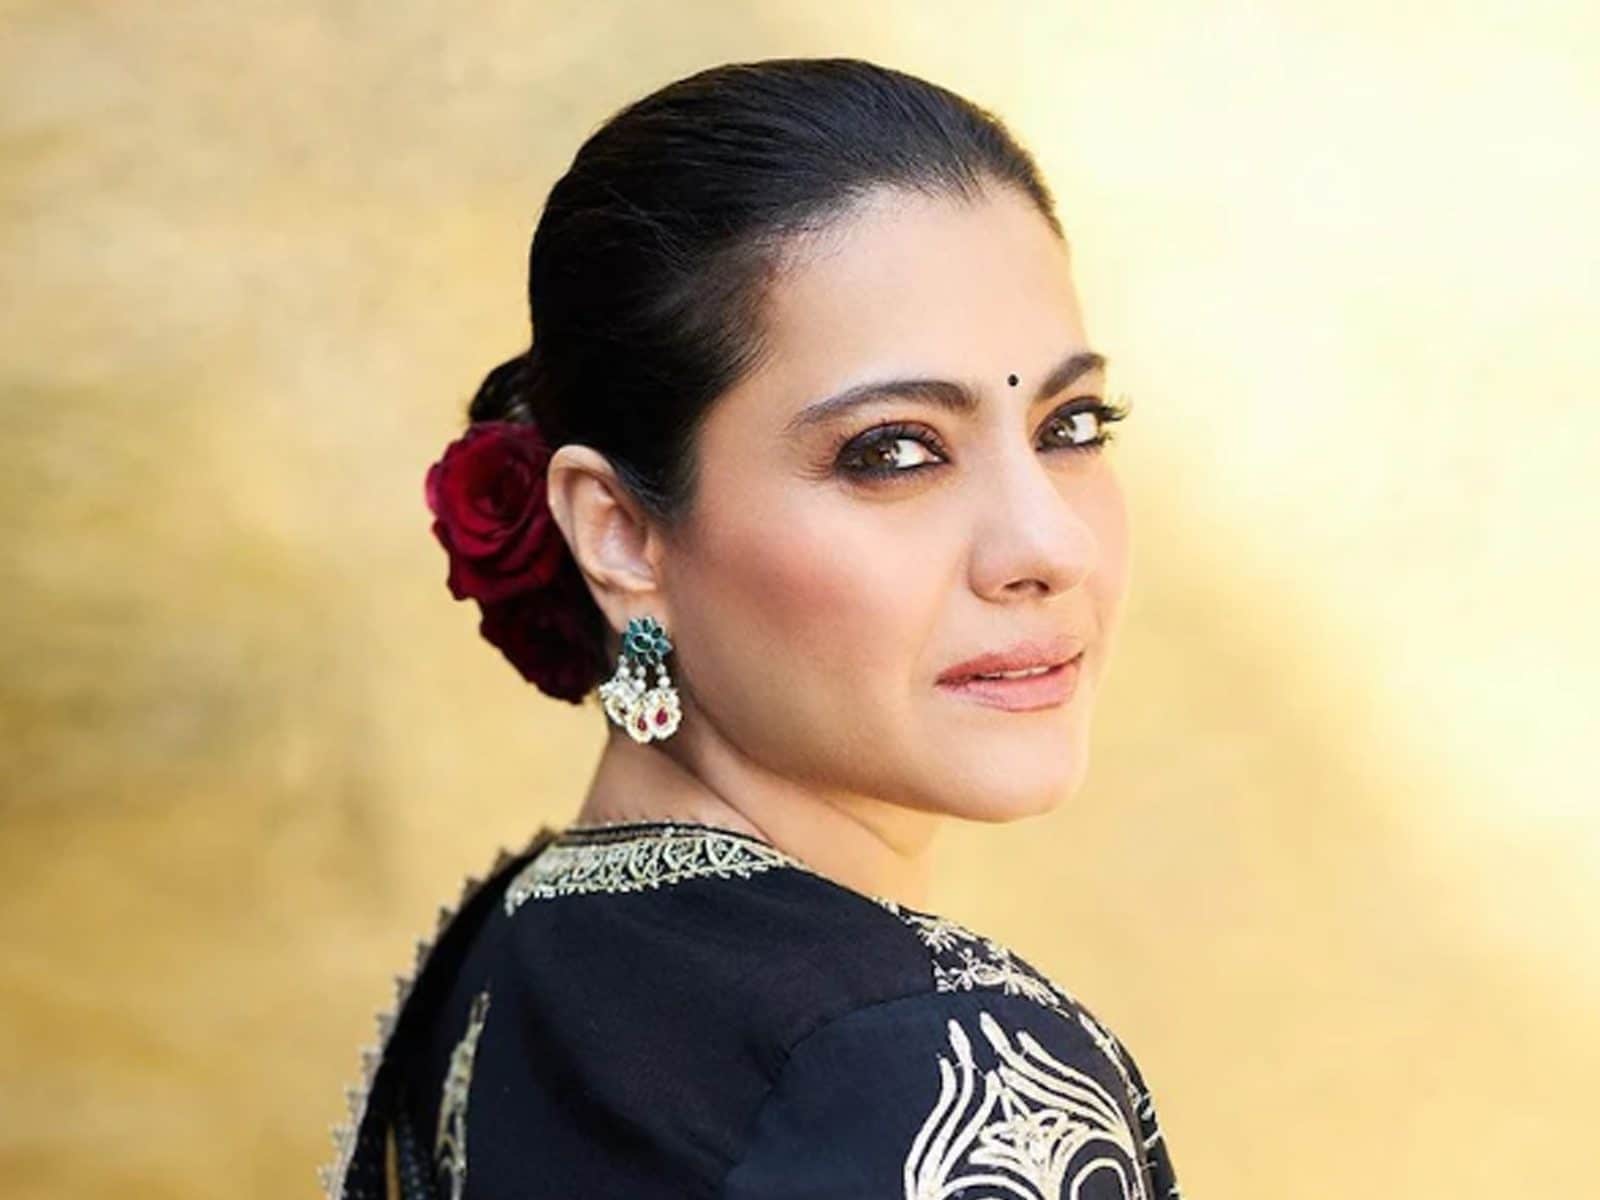 Kajol Ups The Glam Quotient With Her All-Black Desi Avatar - News18